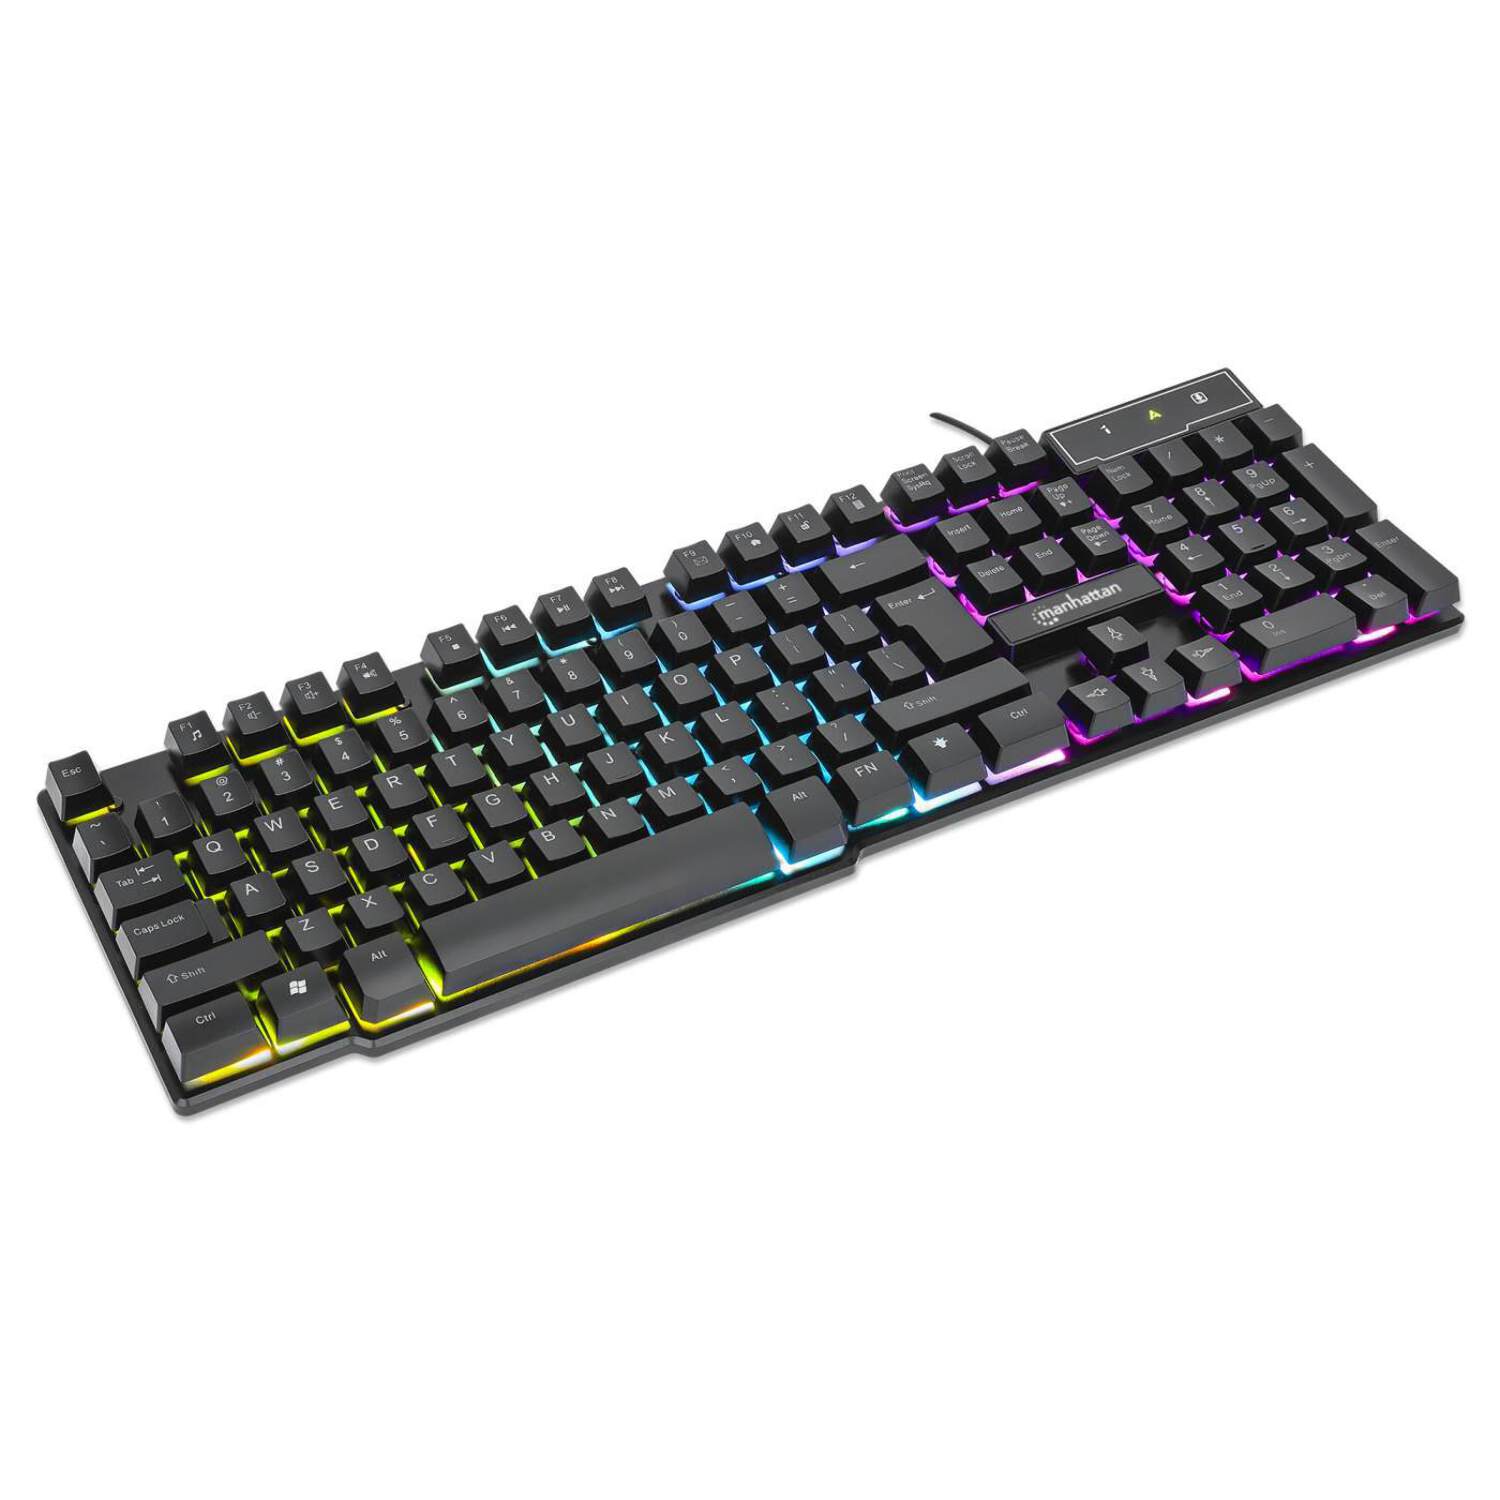 Manhattan Wired USB Gaming Keyboard – With Backlit RGB LED, Quiet Keystrokes - For Computer, PC, Desktop, Gamer - image 2 of 11